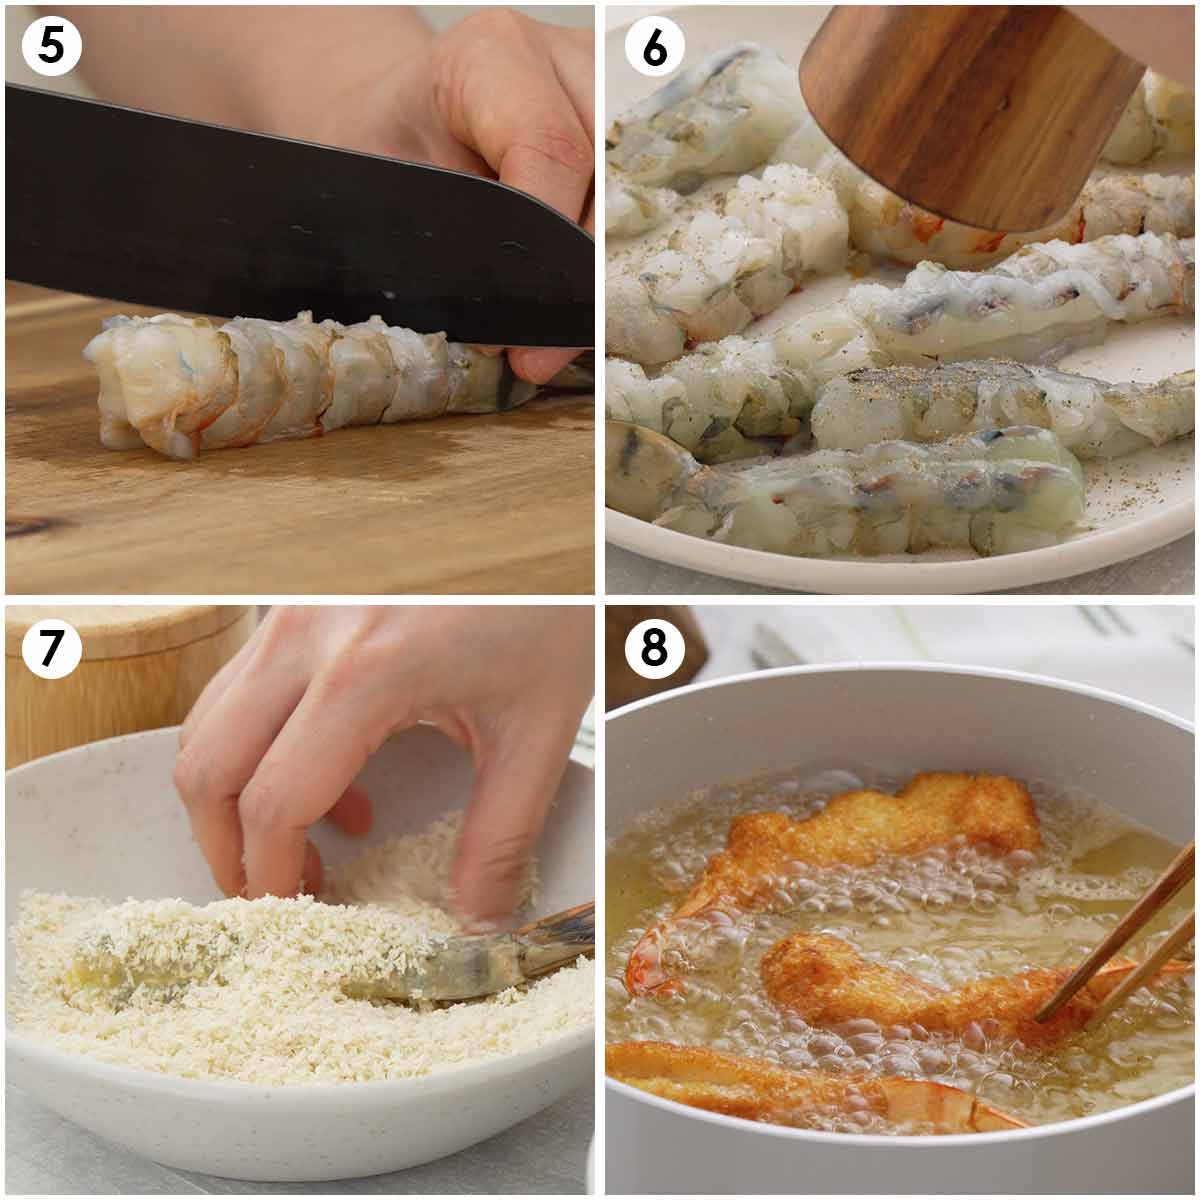 4 image collage showing how to prepare panko prawns and deep fry them.